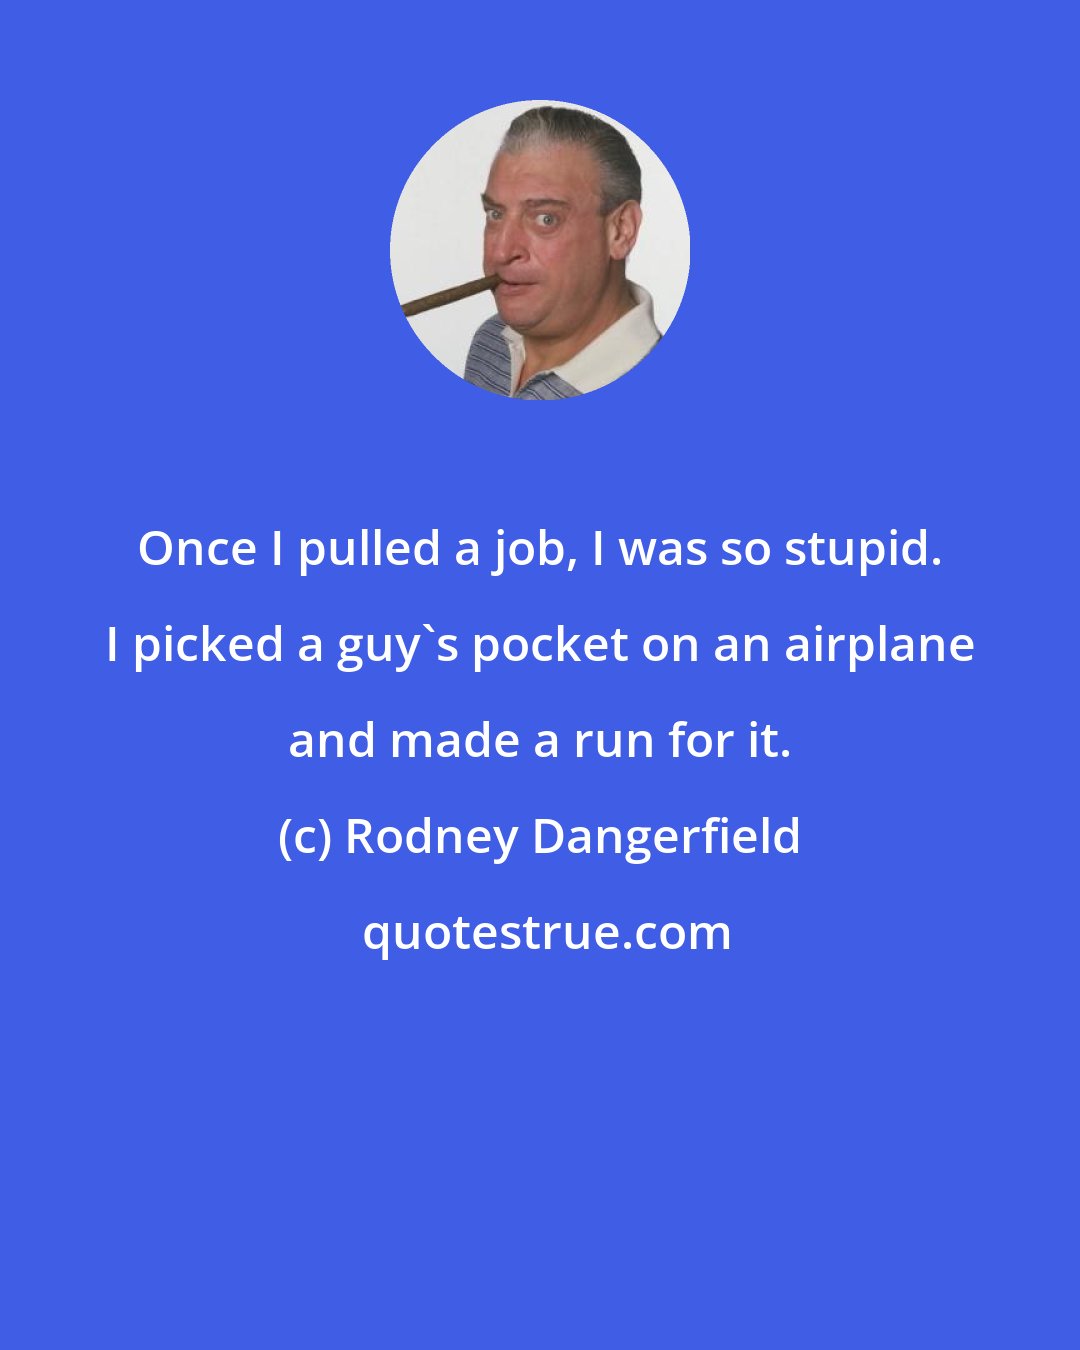 Rodney Dangerfield: Once I pulled a job, I was so stupid. I picked a guy's pocket on an airplane and made a run for it.